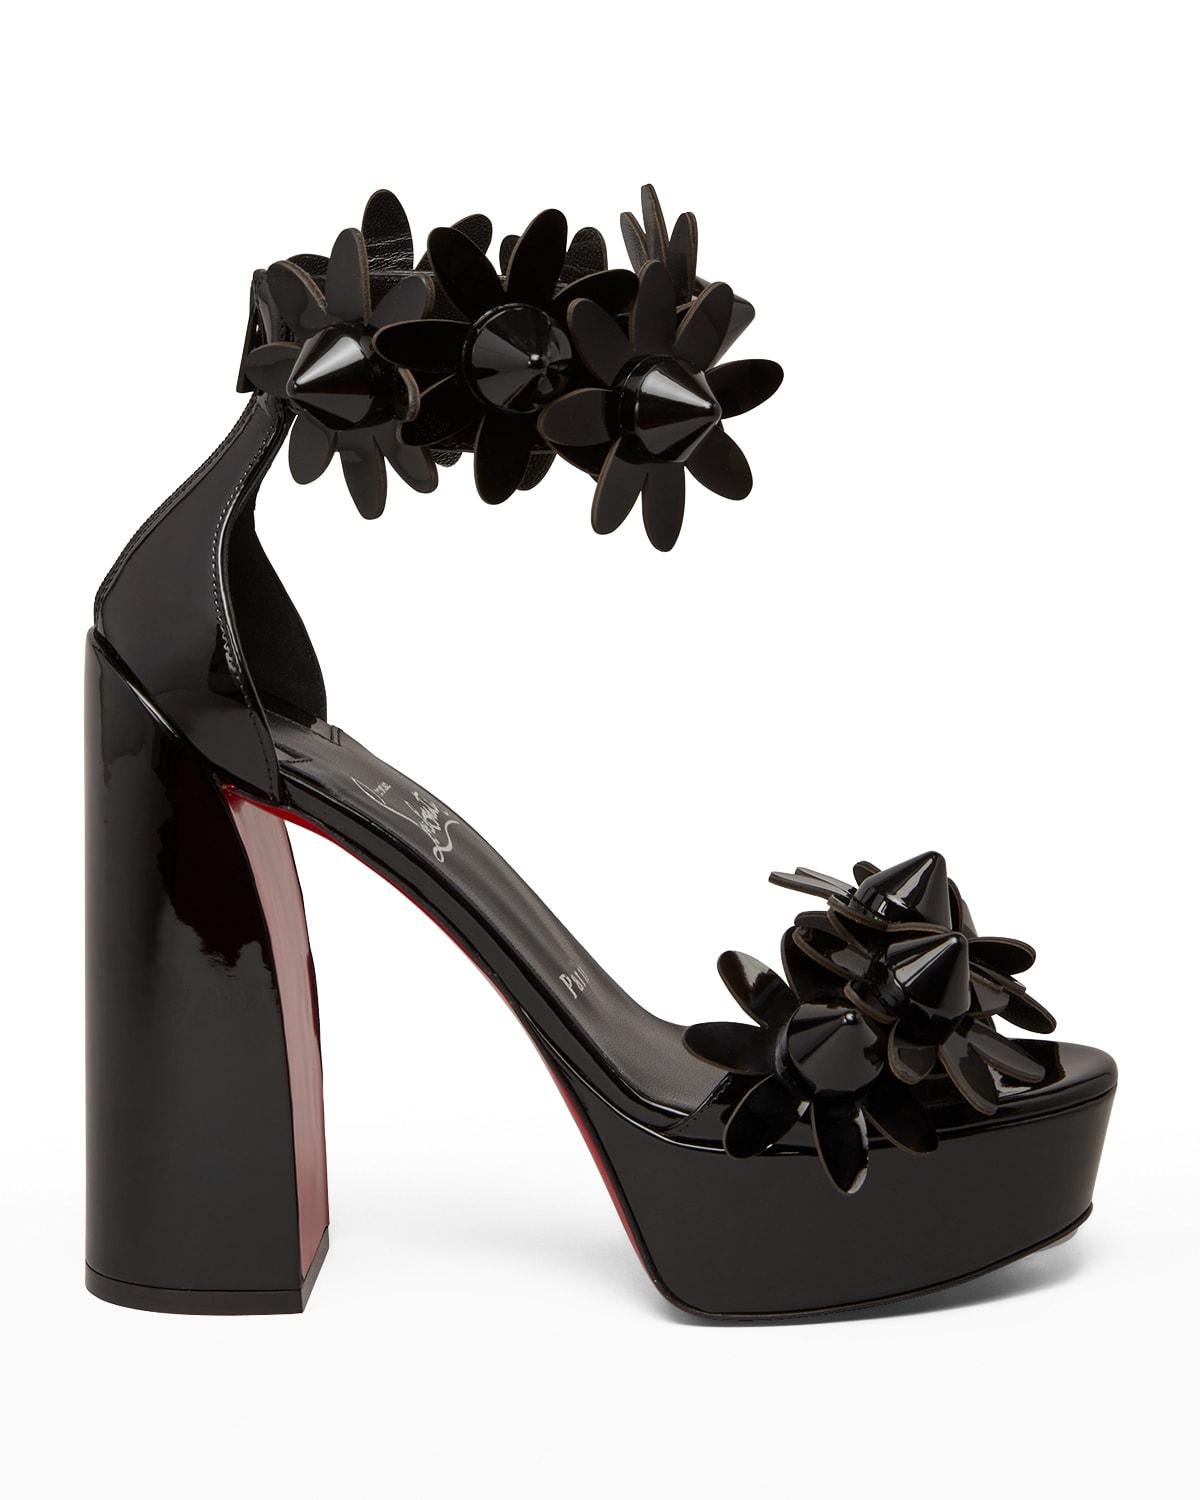 Christian Louboutin Daisy Spike Ankle-cuff Red Sole Sandals in Black | Lyst